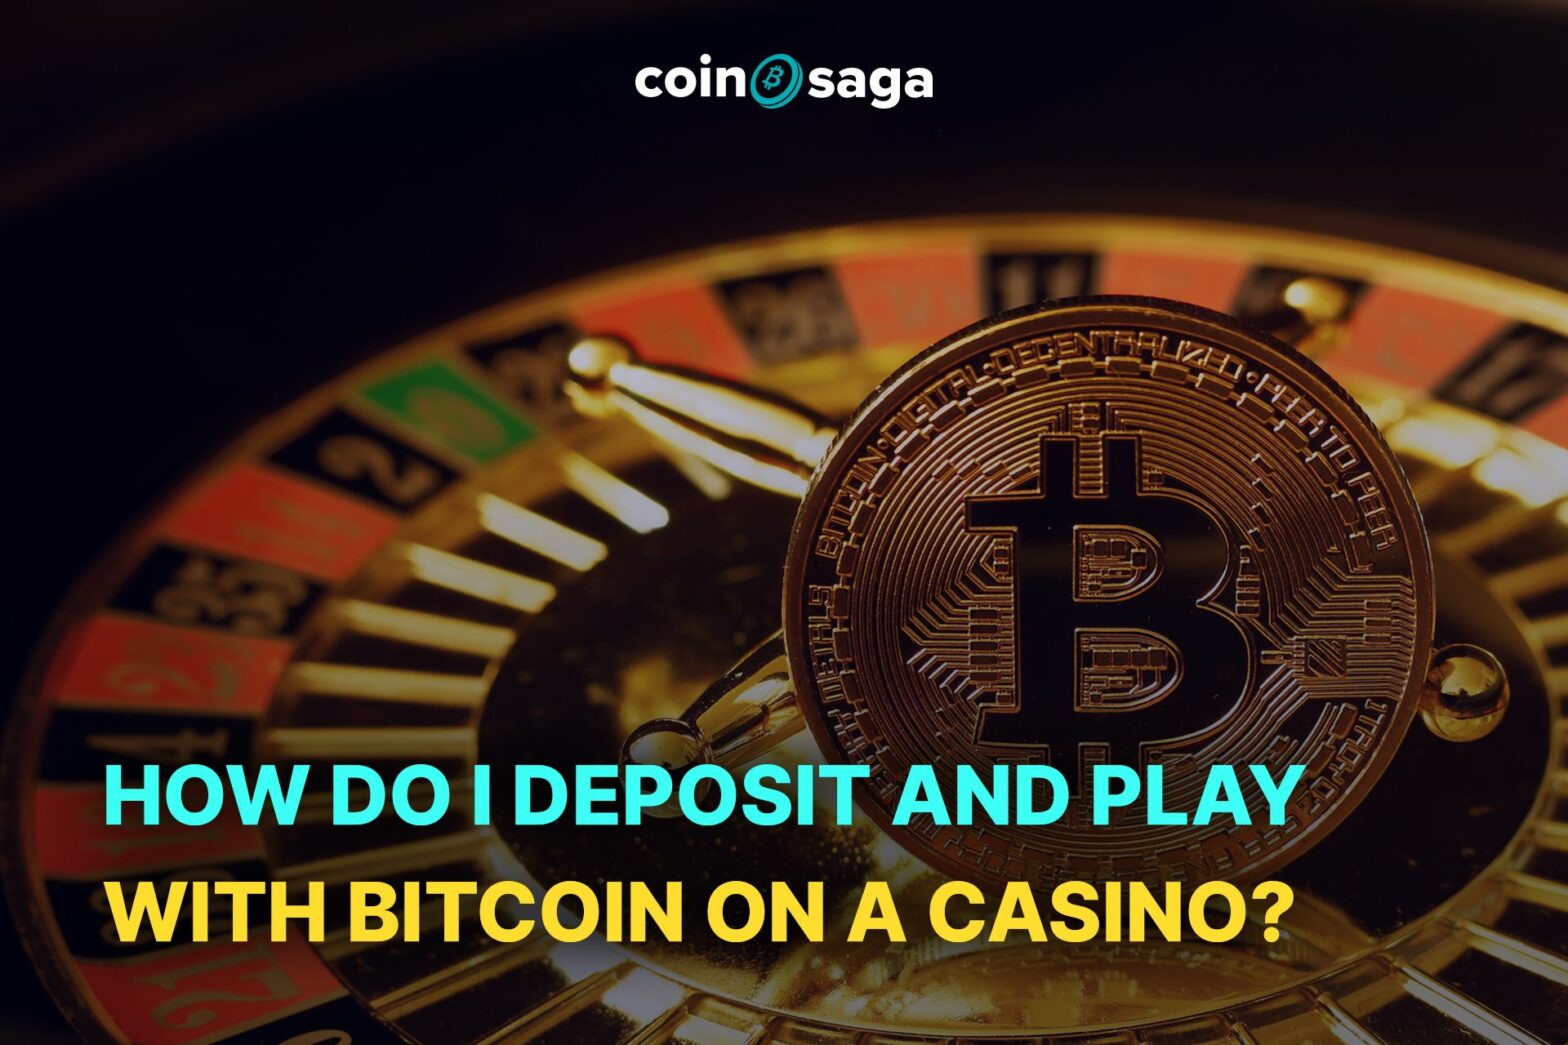 deposit and play with Bitcoin on a Casino